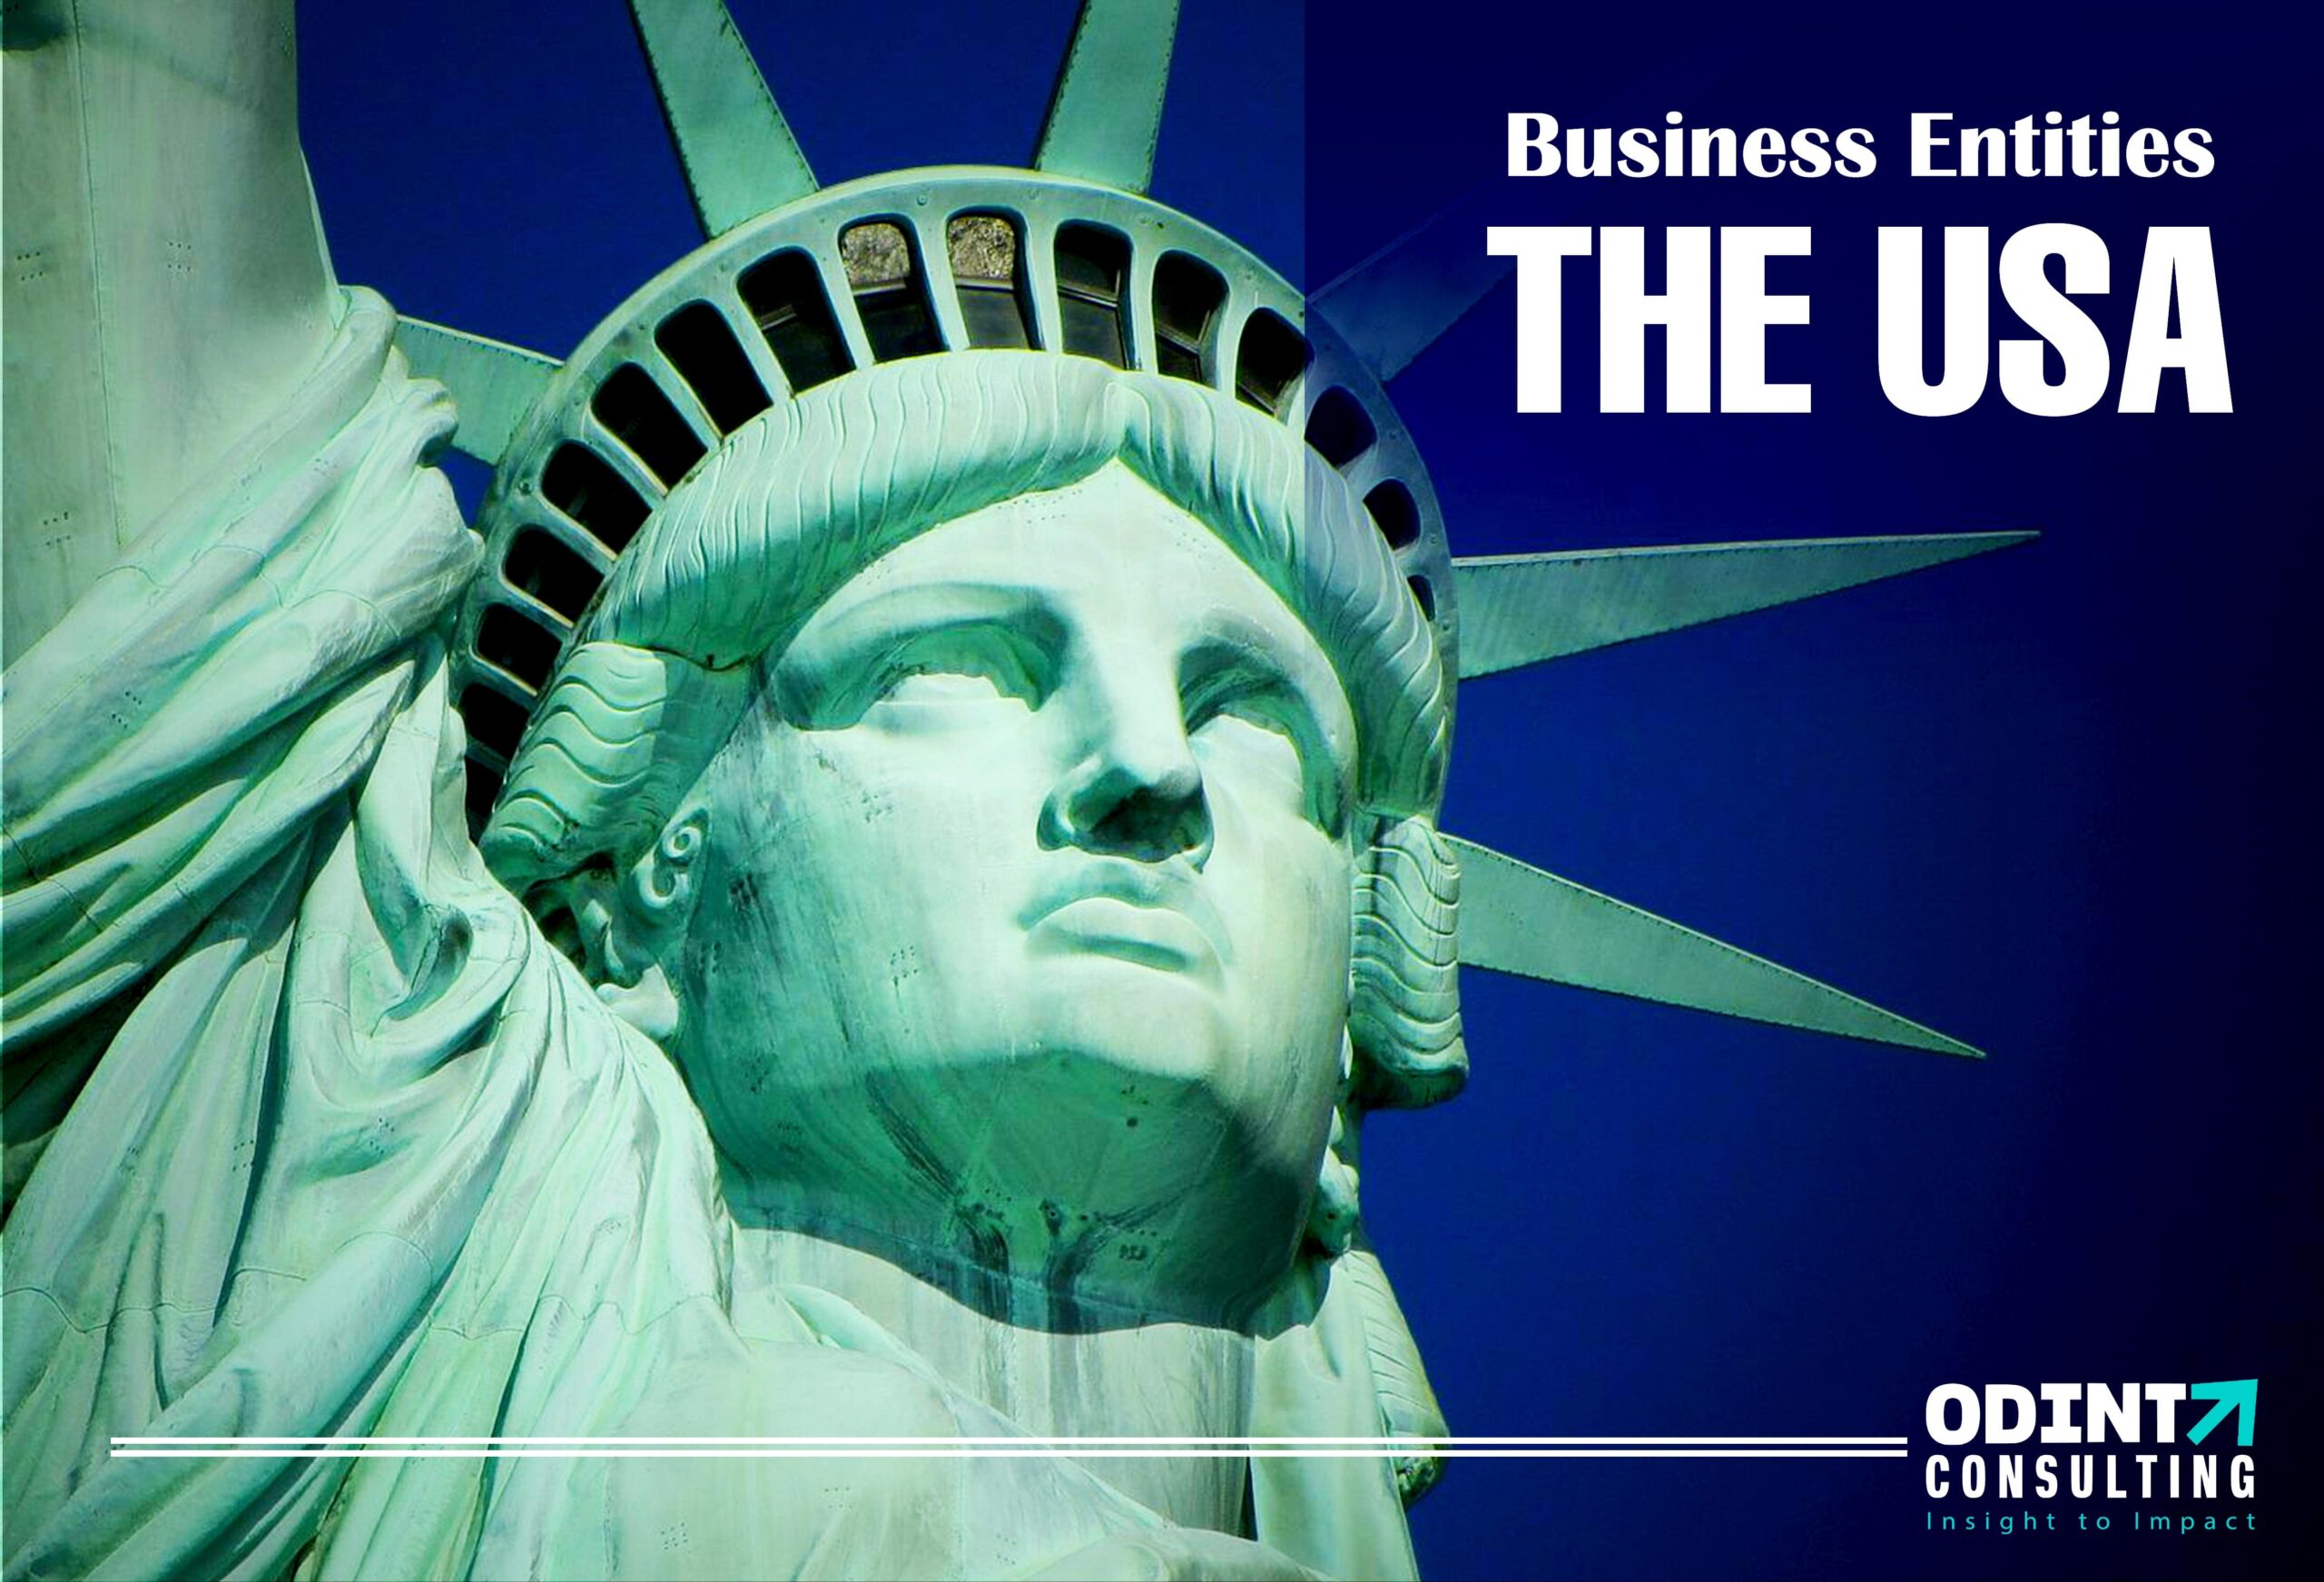 Types Of Business Entities In The USA